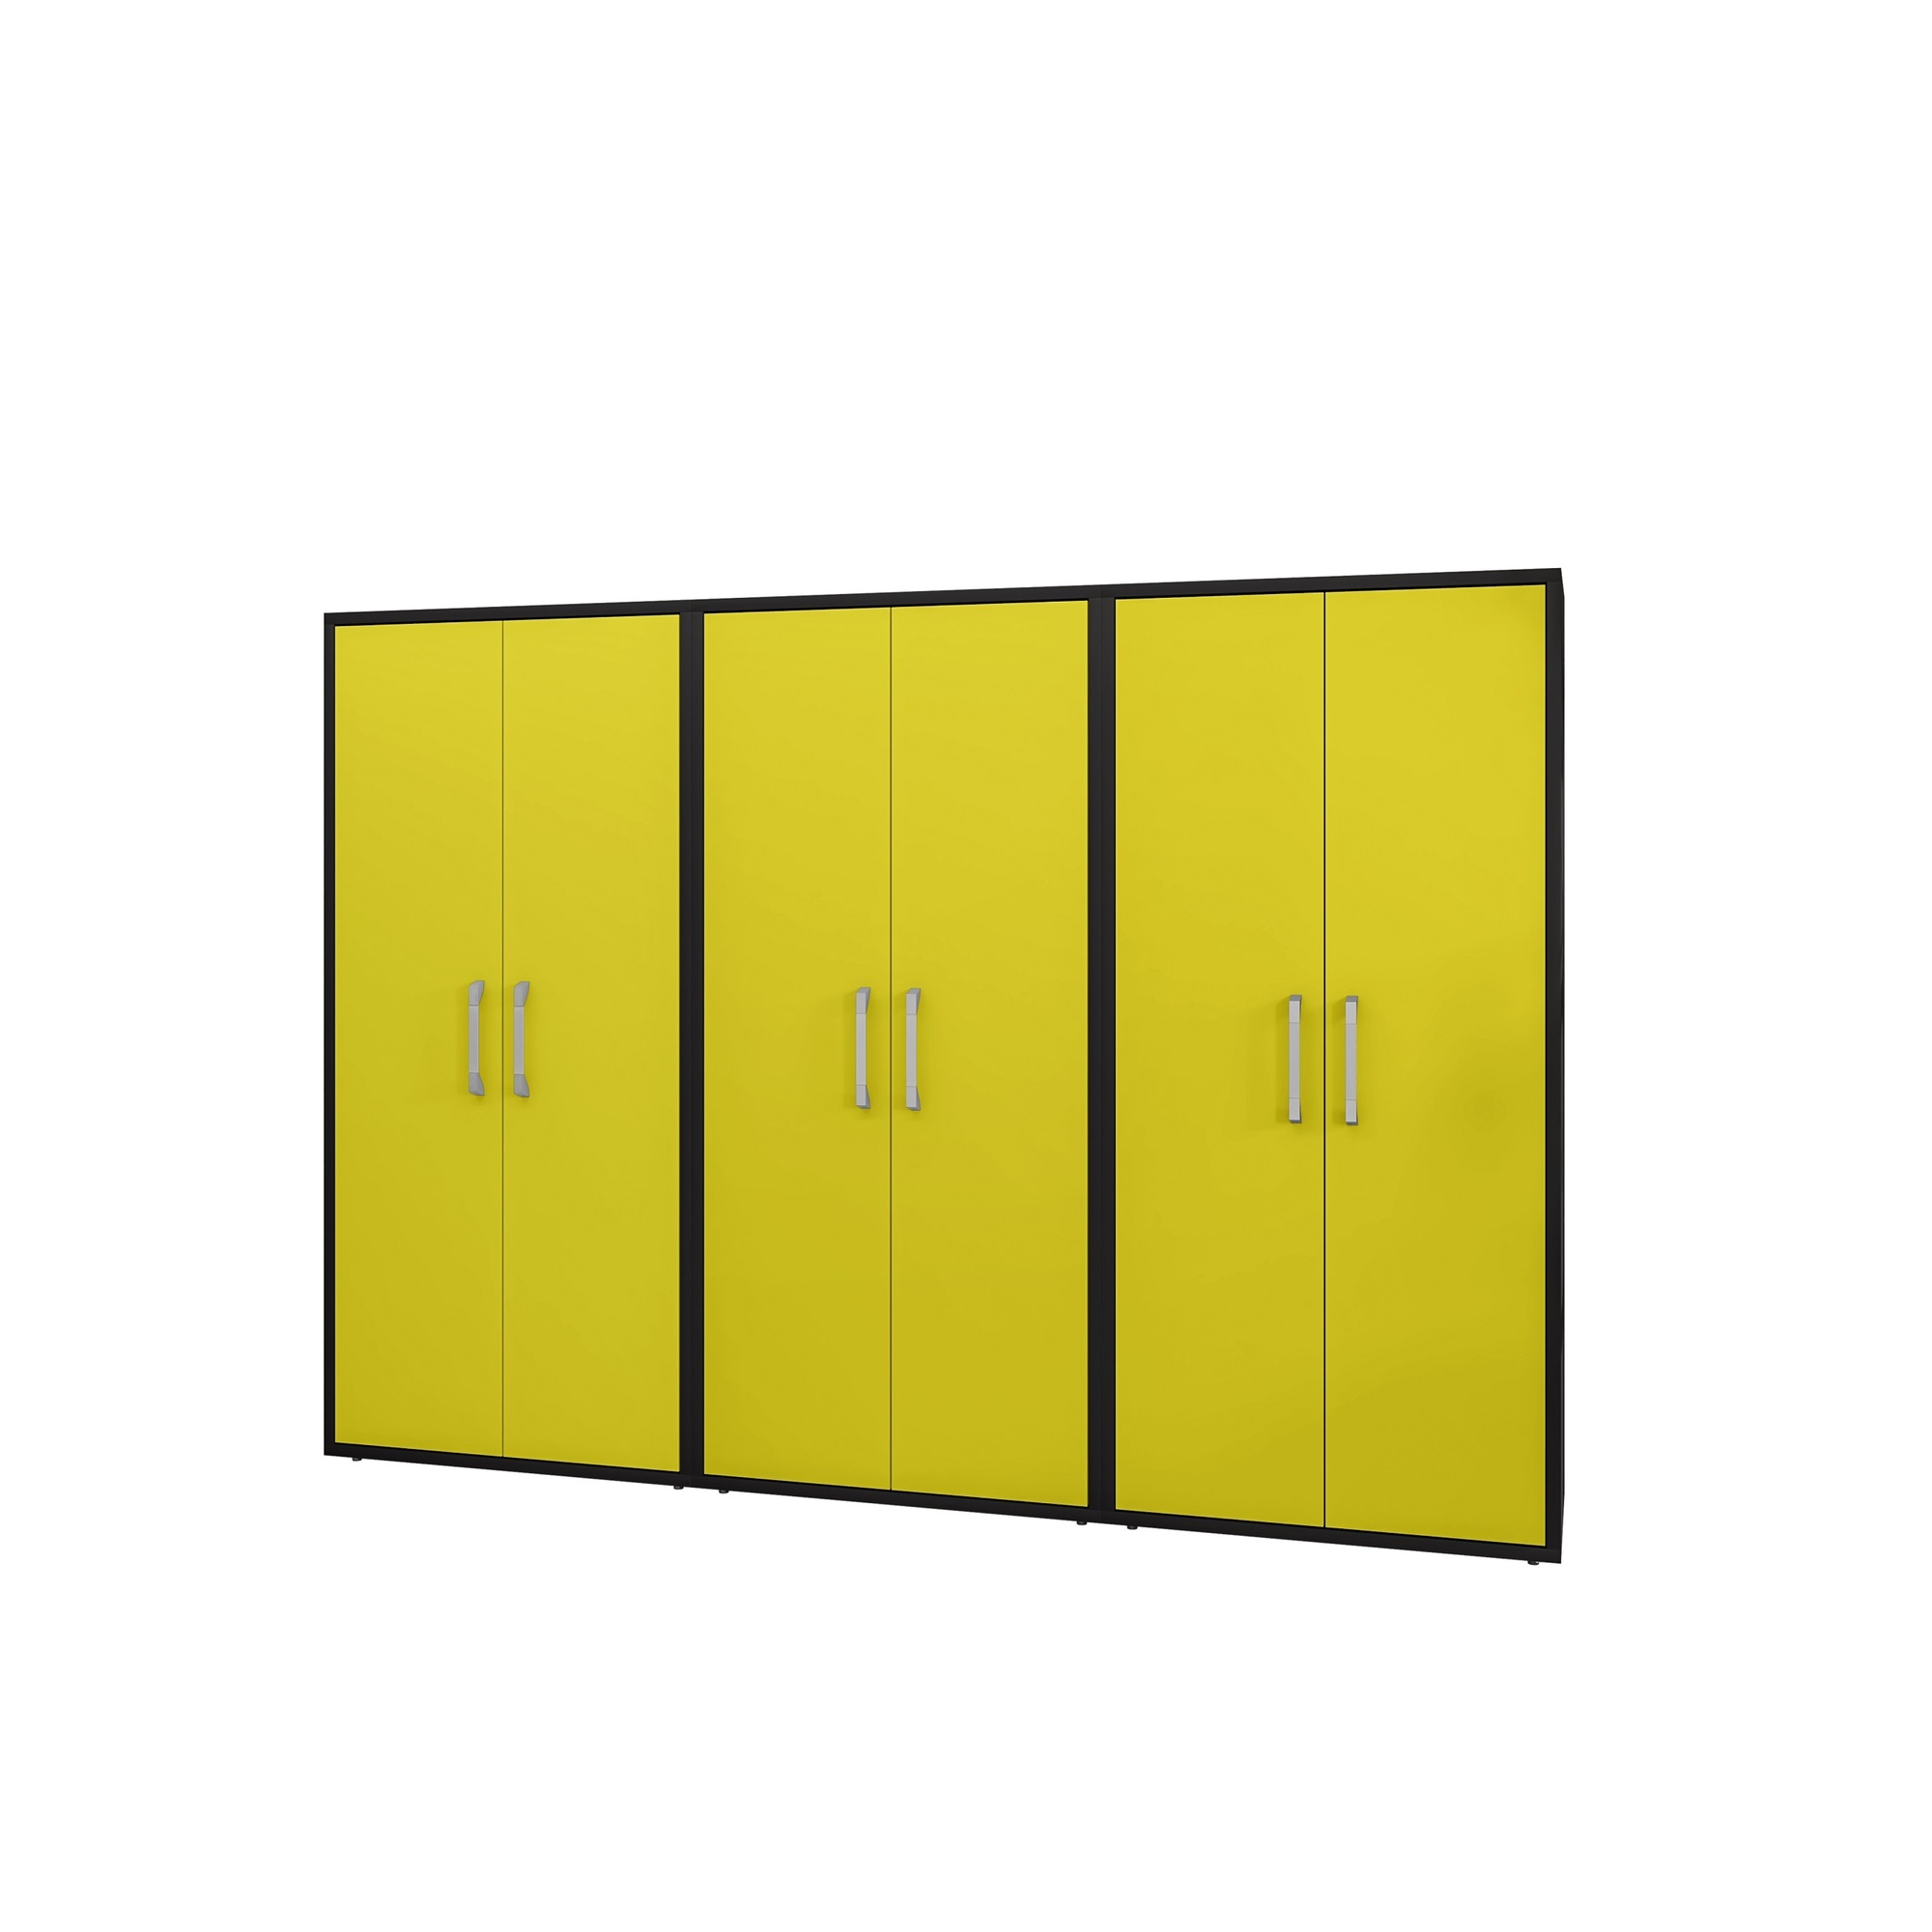 Manhattan Comfort, Eiffel Storage Cabinet Black and Yellow, Set of 3 Height 73.43 in, Width 106.29 in, Color Yellow, Model 3-250BMC